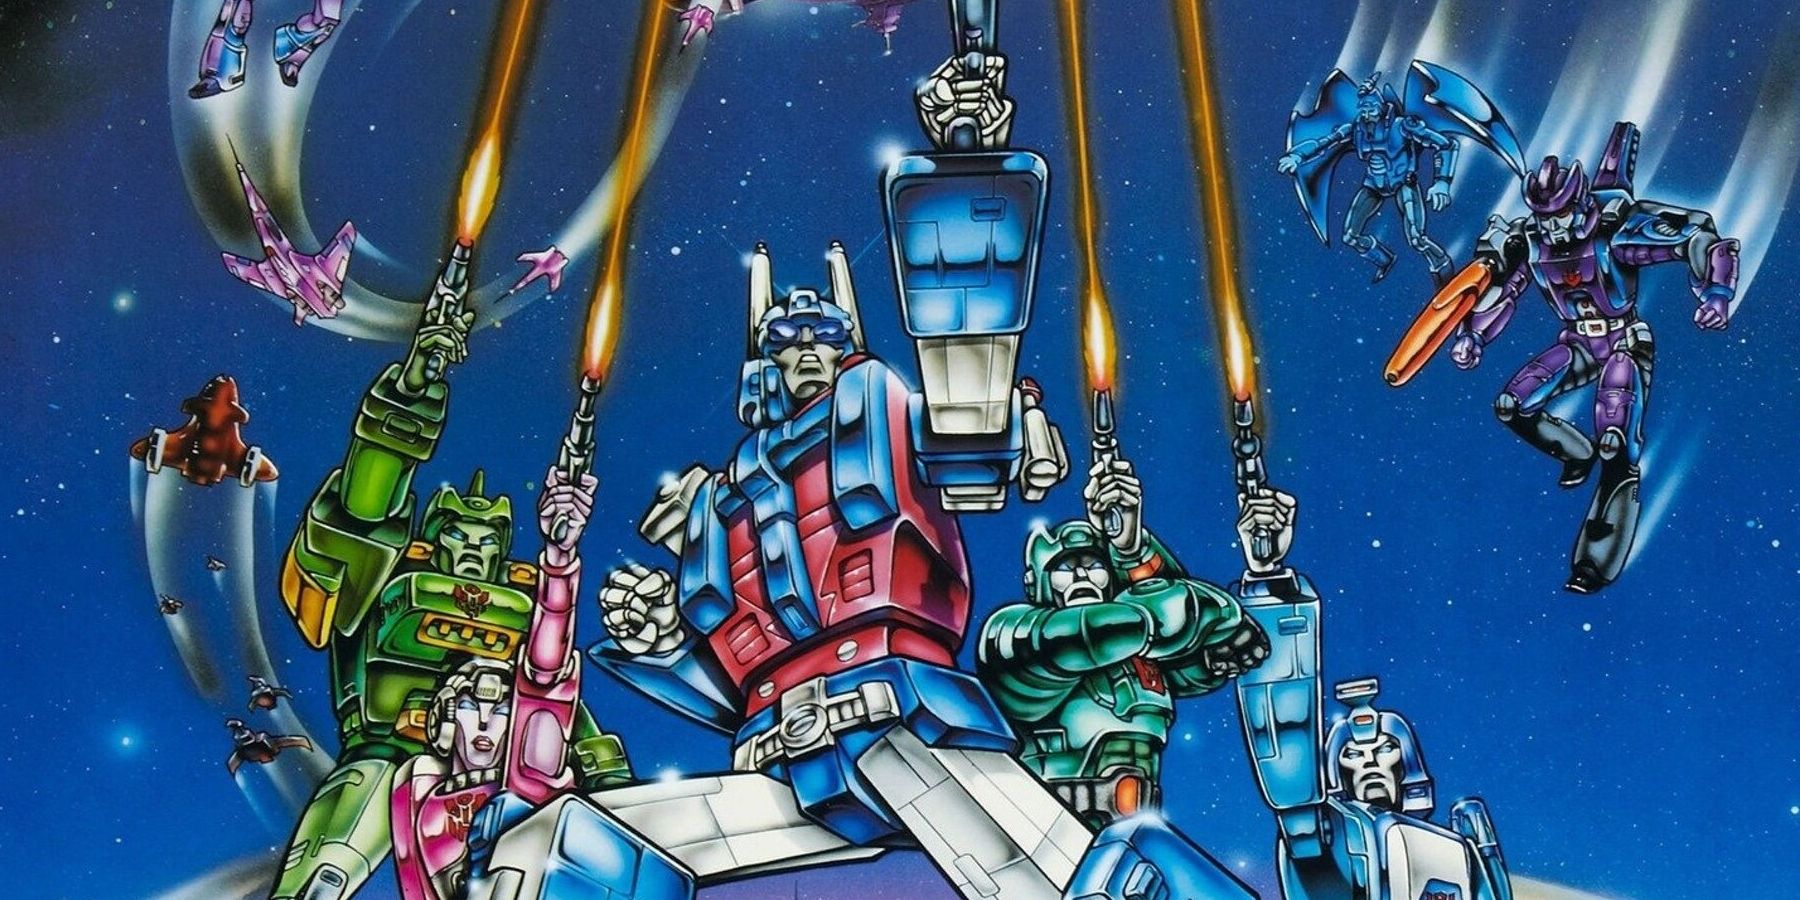 The 18 Best Transformers Shows Of All Time, As Ranked By Viewers